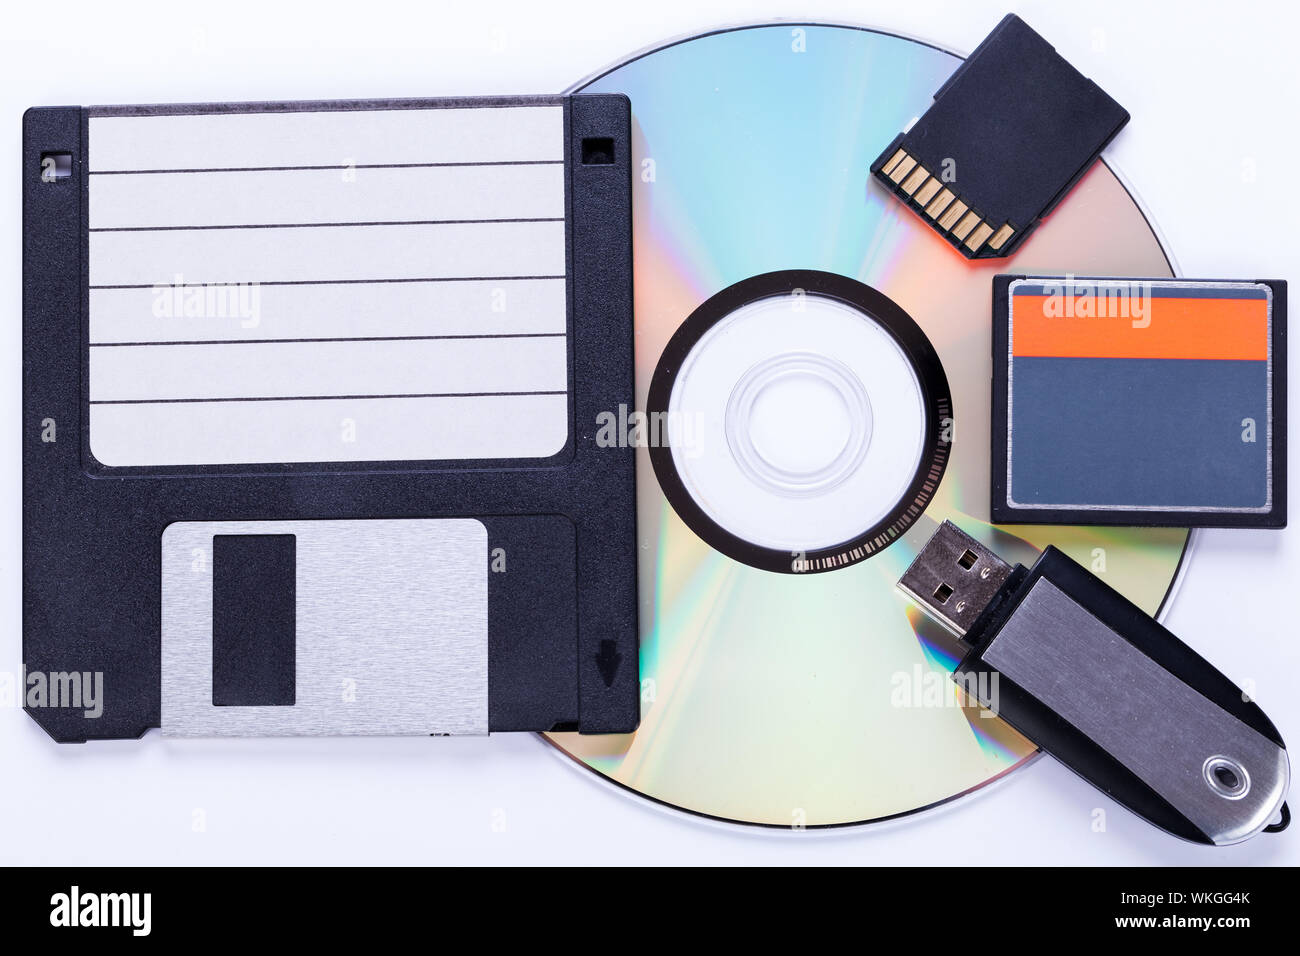 Selection of different computer storage devices for data and information  including a CD-DVD, floppy disc, USB key, compact flash card and SD card  view Stock Photo - Alamy